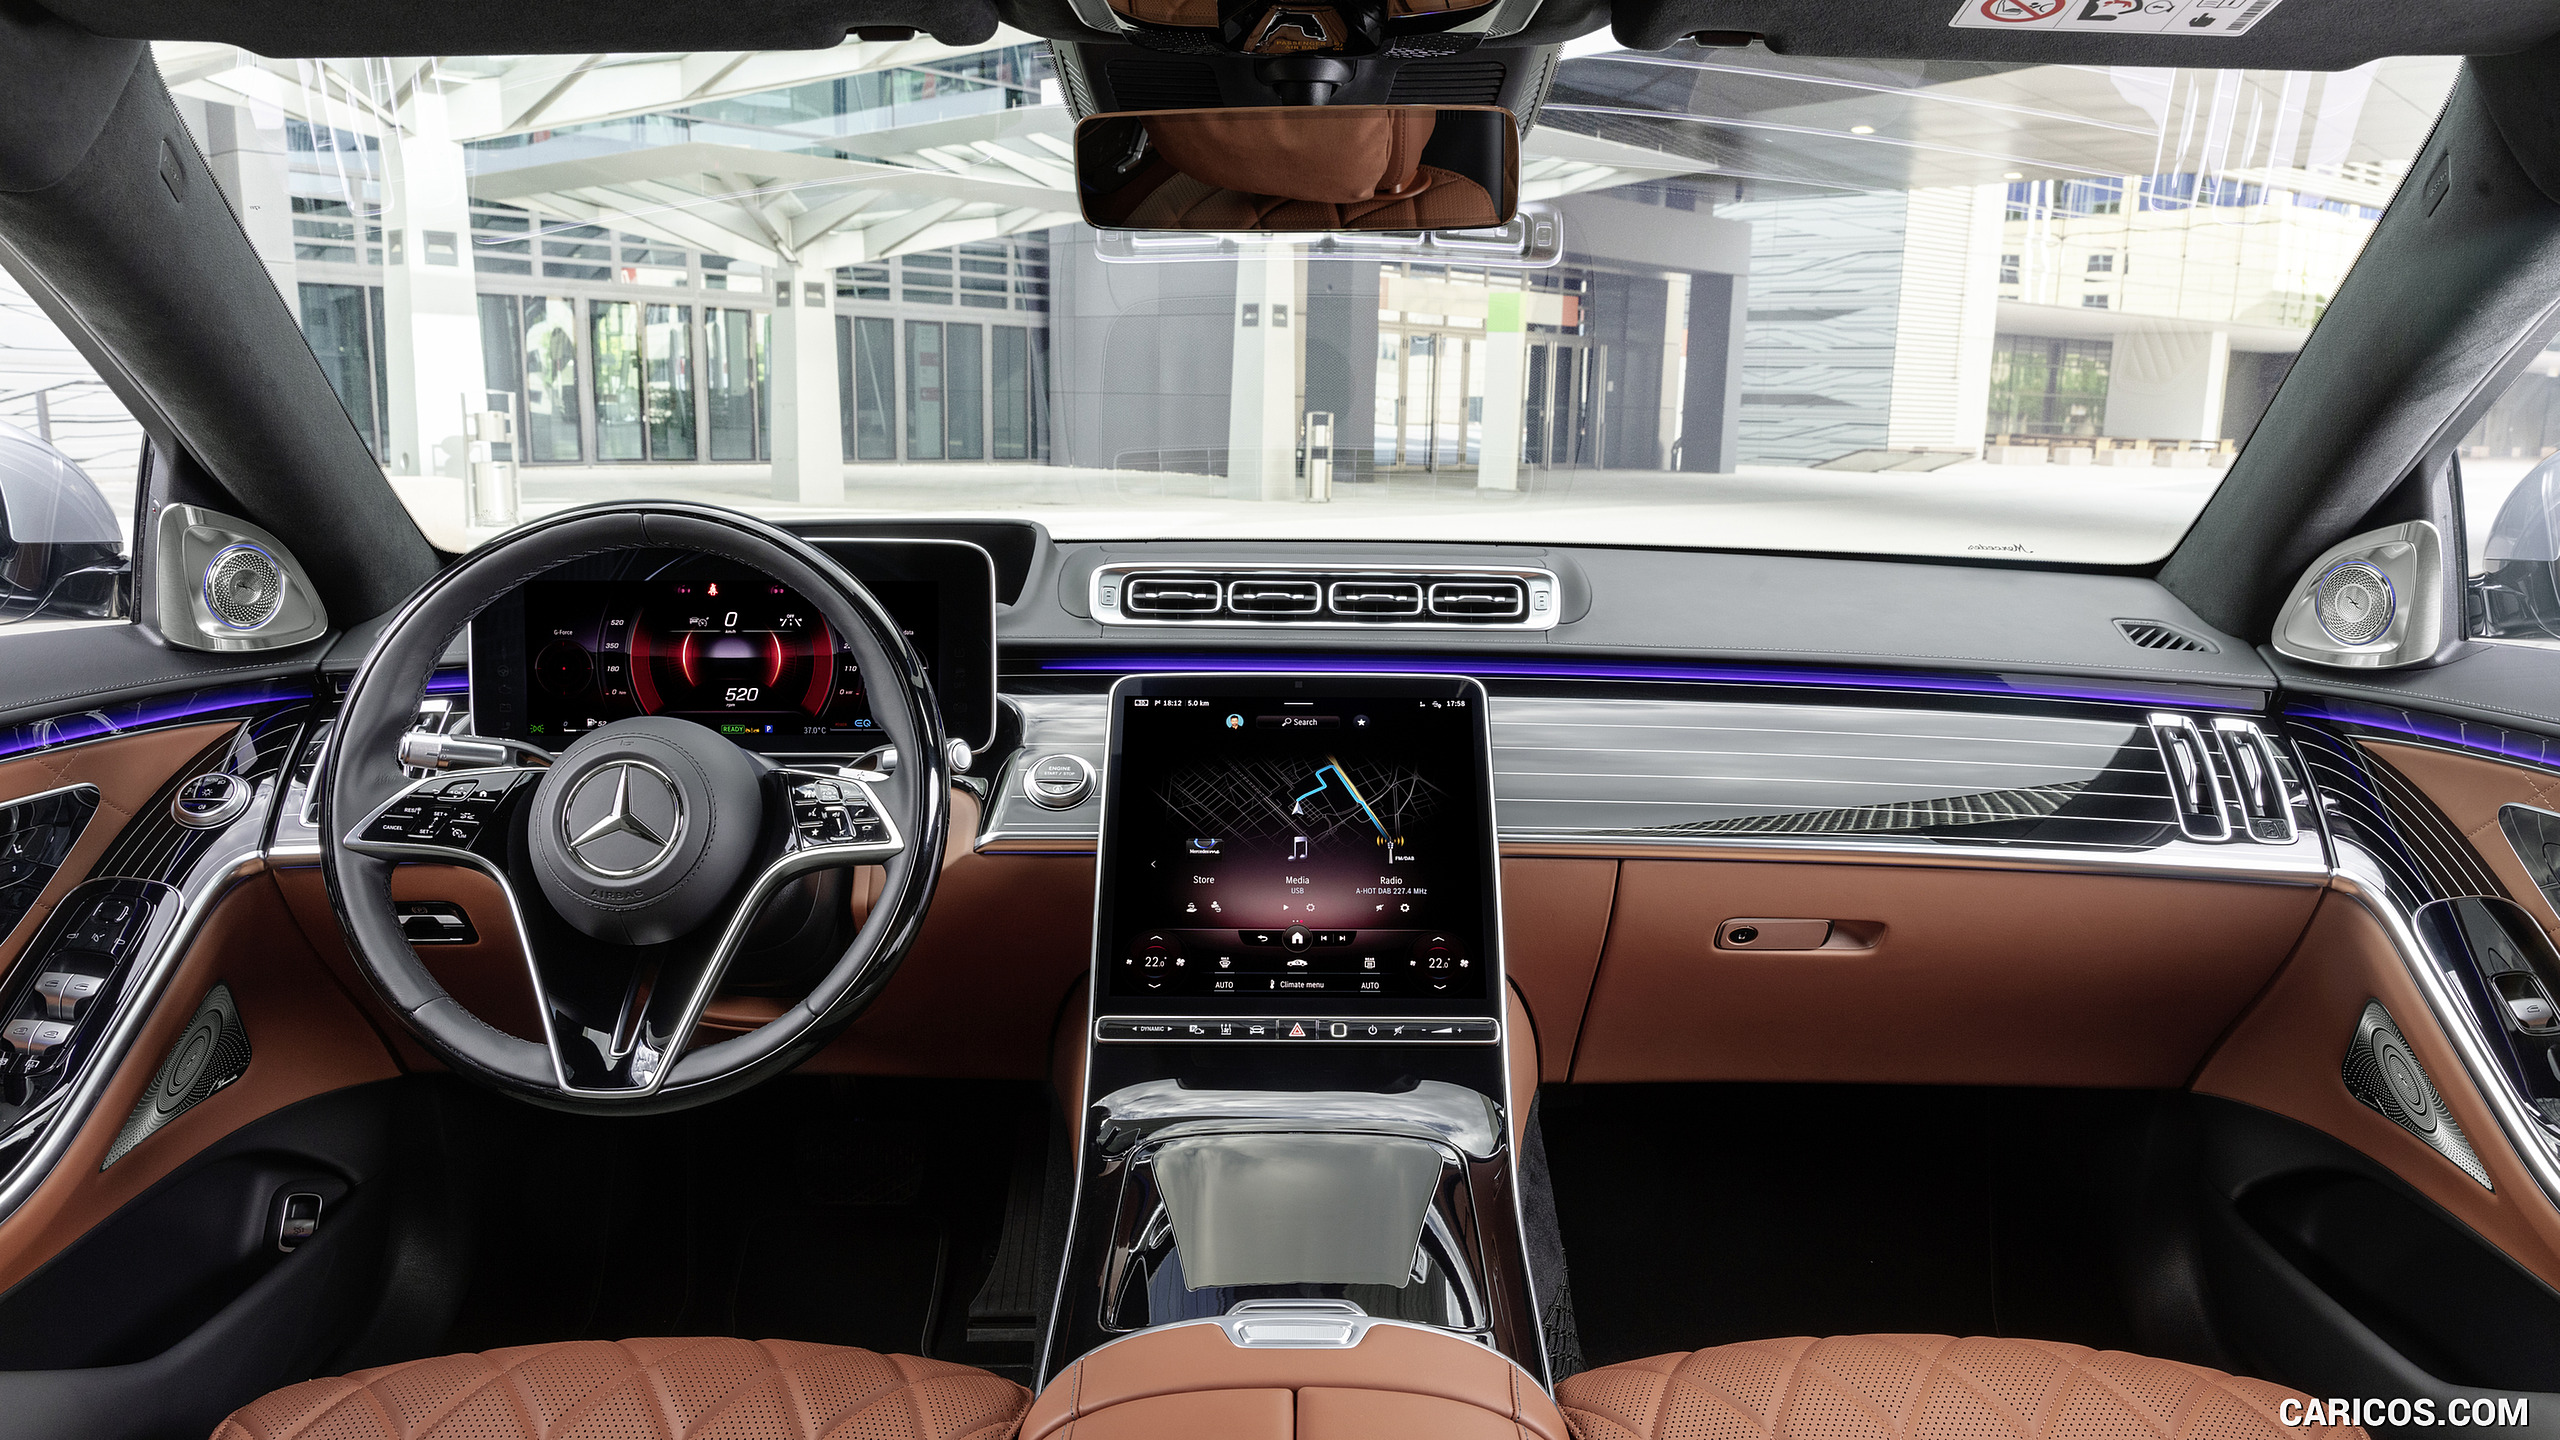 2021 Mercedes-Benz S-Class (Color: Leather Siena Brown) - Interior, Cockpit, #107 of 316